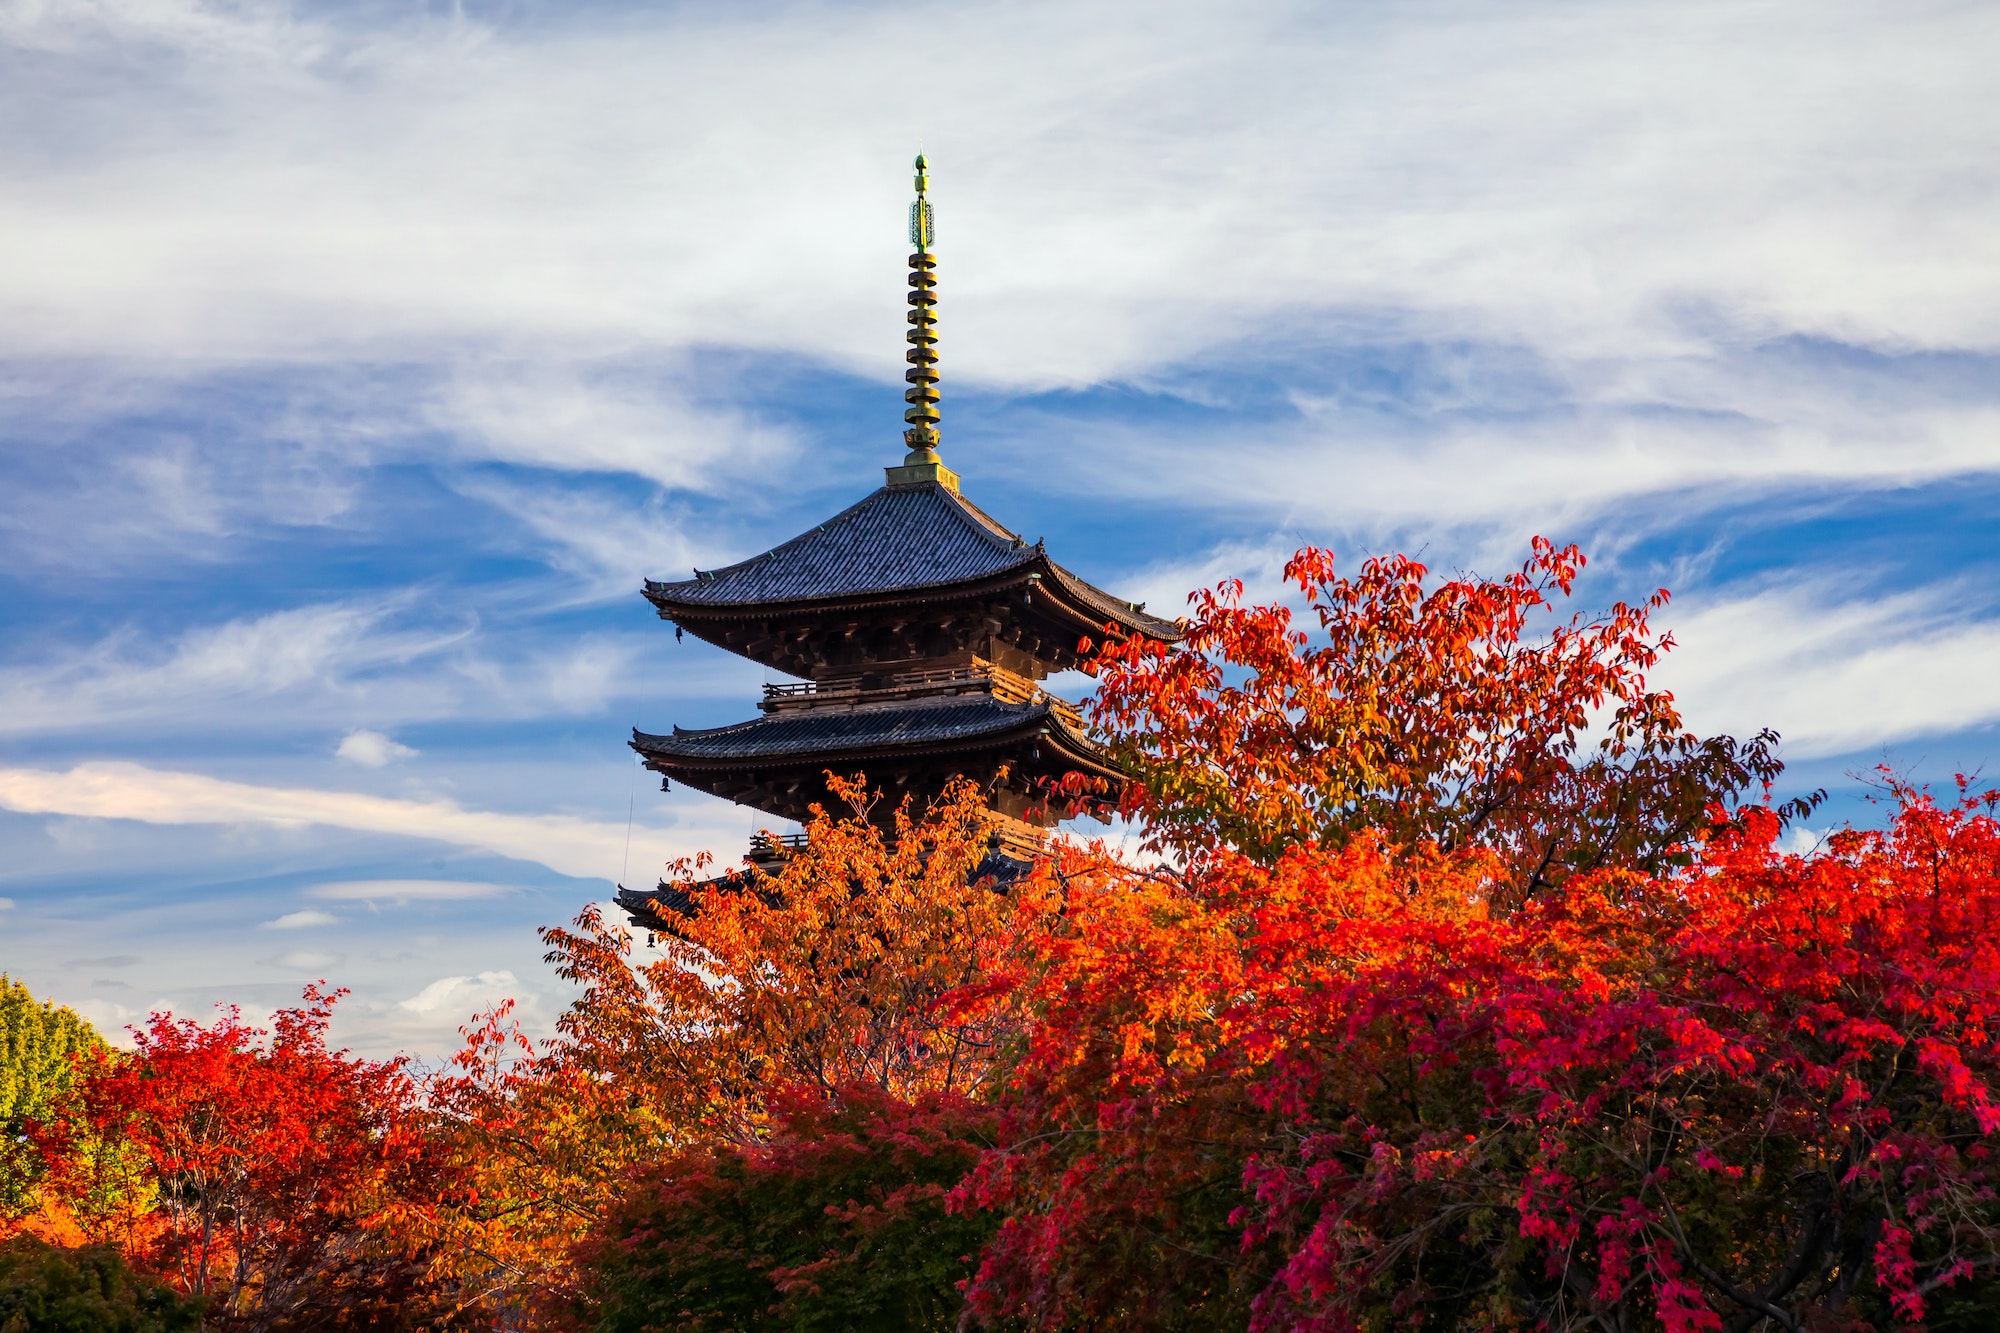 The wooden tower of To-ji Temple in Kyoto at autumn